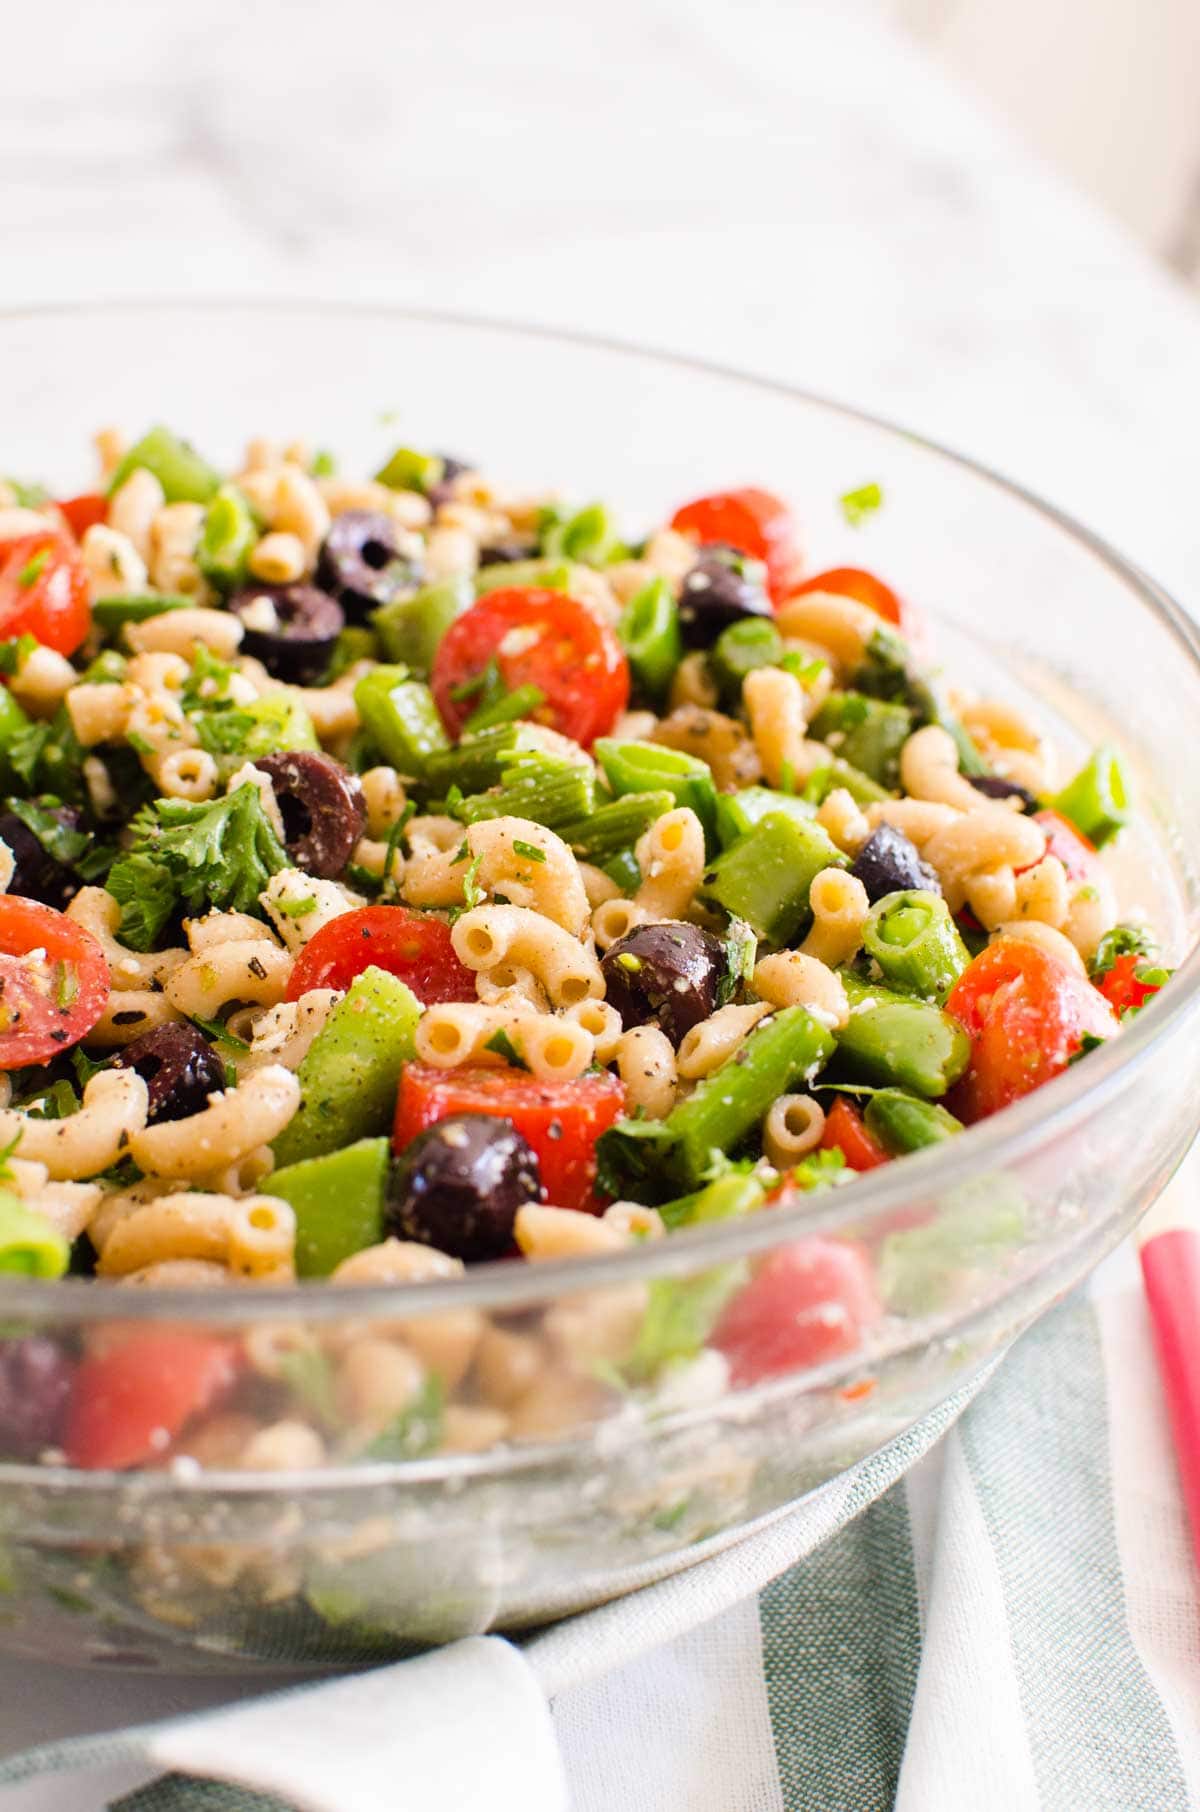 Healthy pasta salad in a glass bowl.